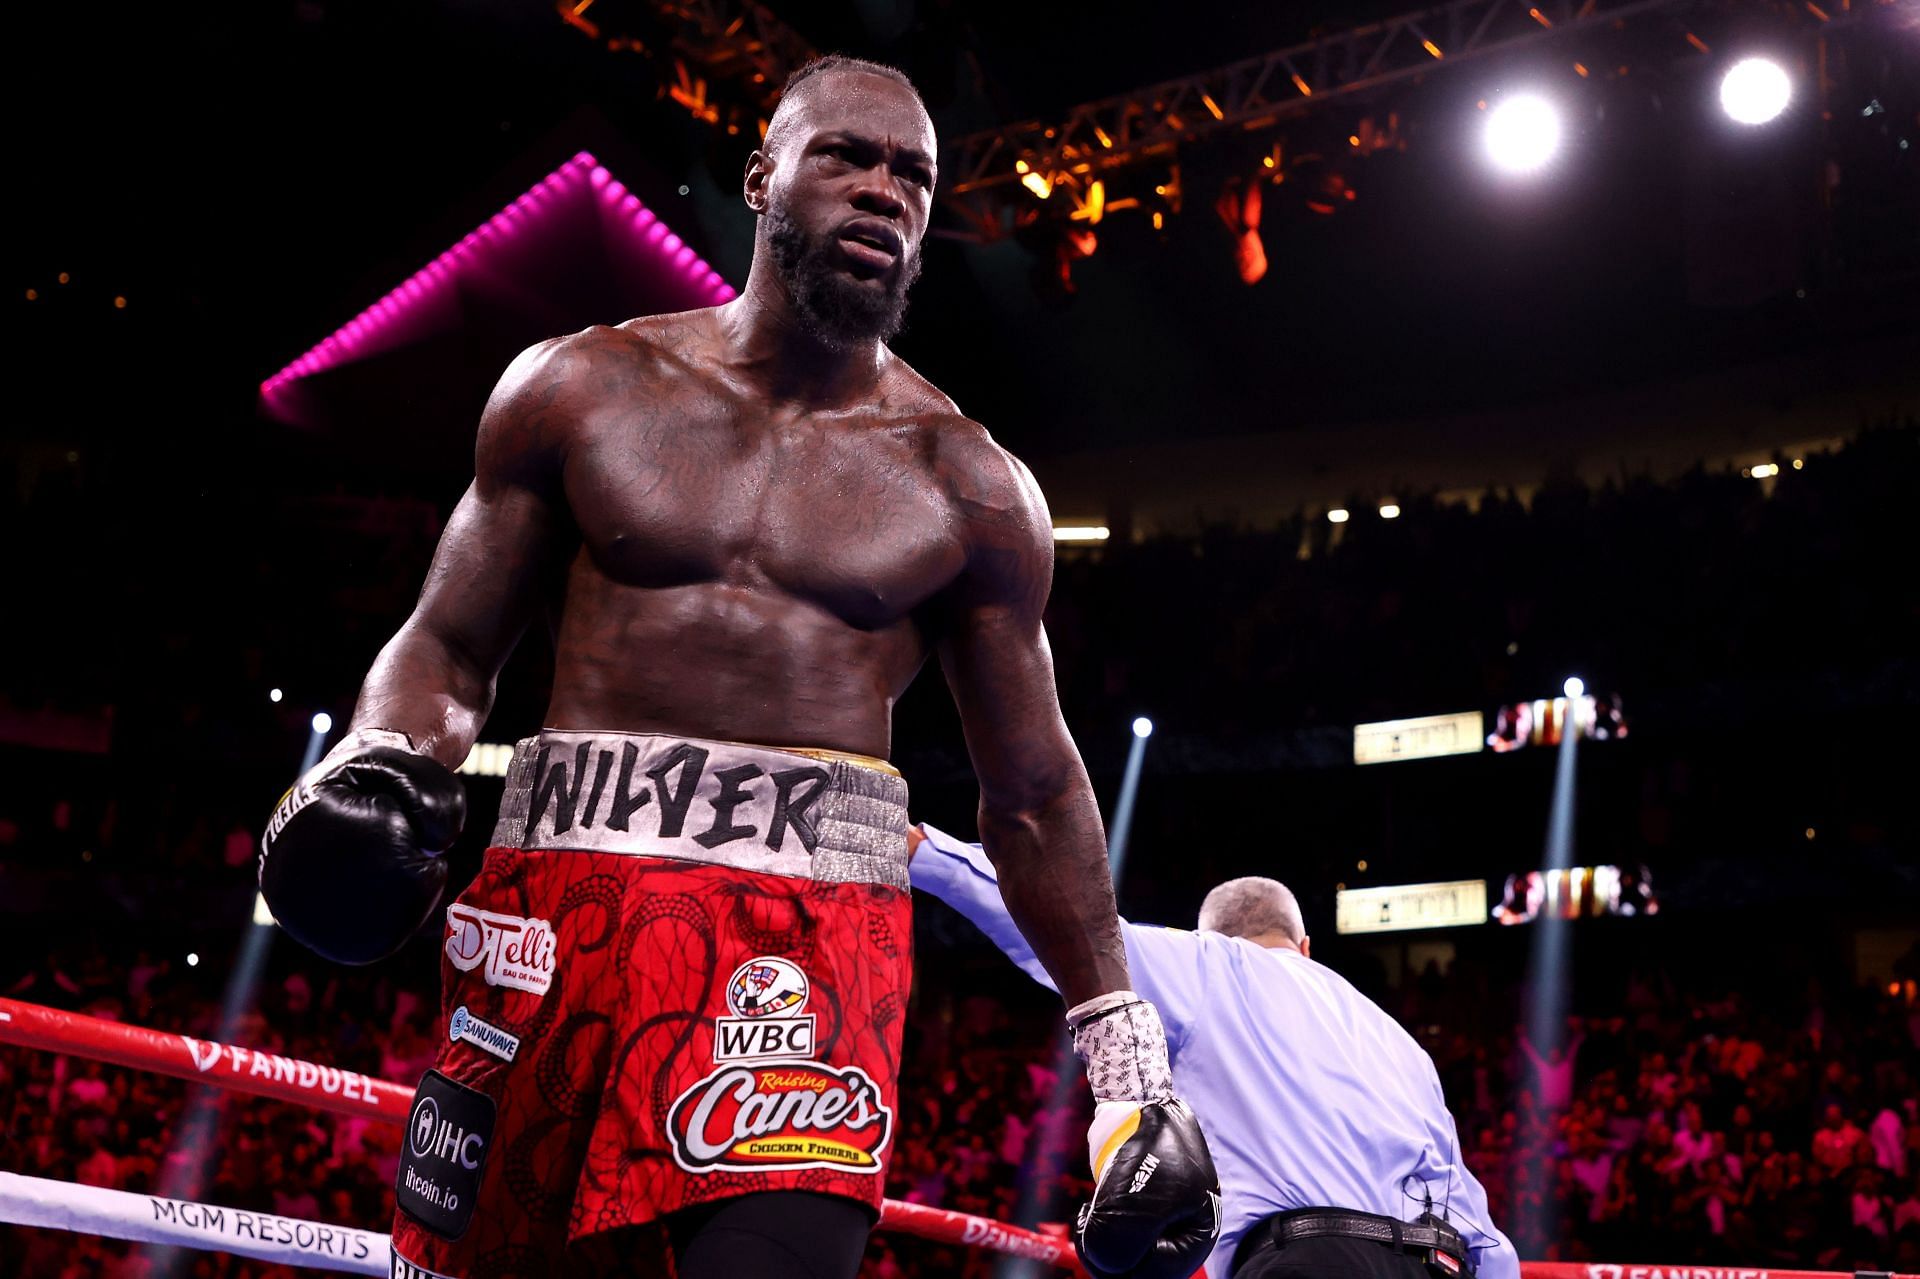 Deontay Wilder is the former WBC Heavyweight Champion